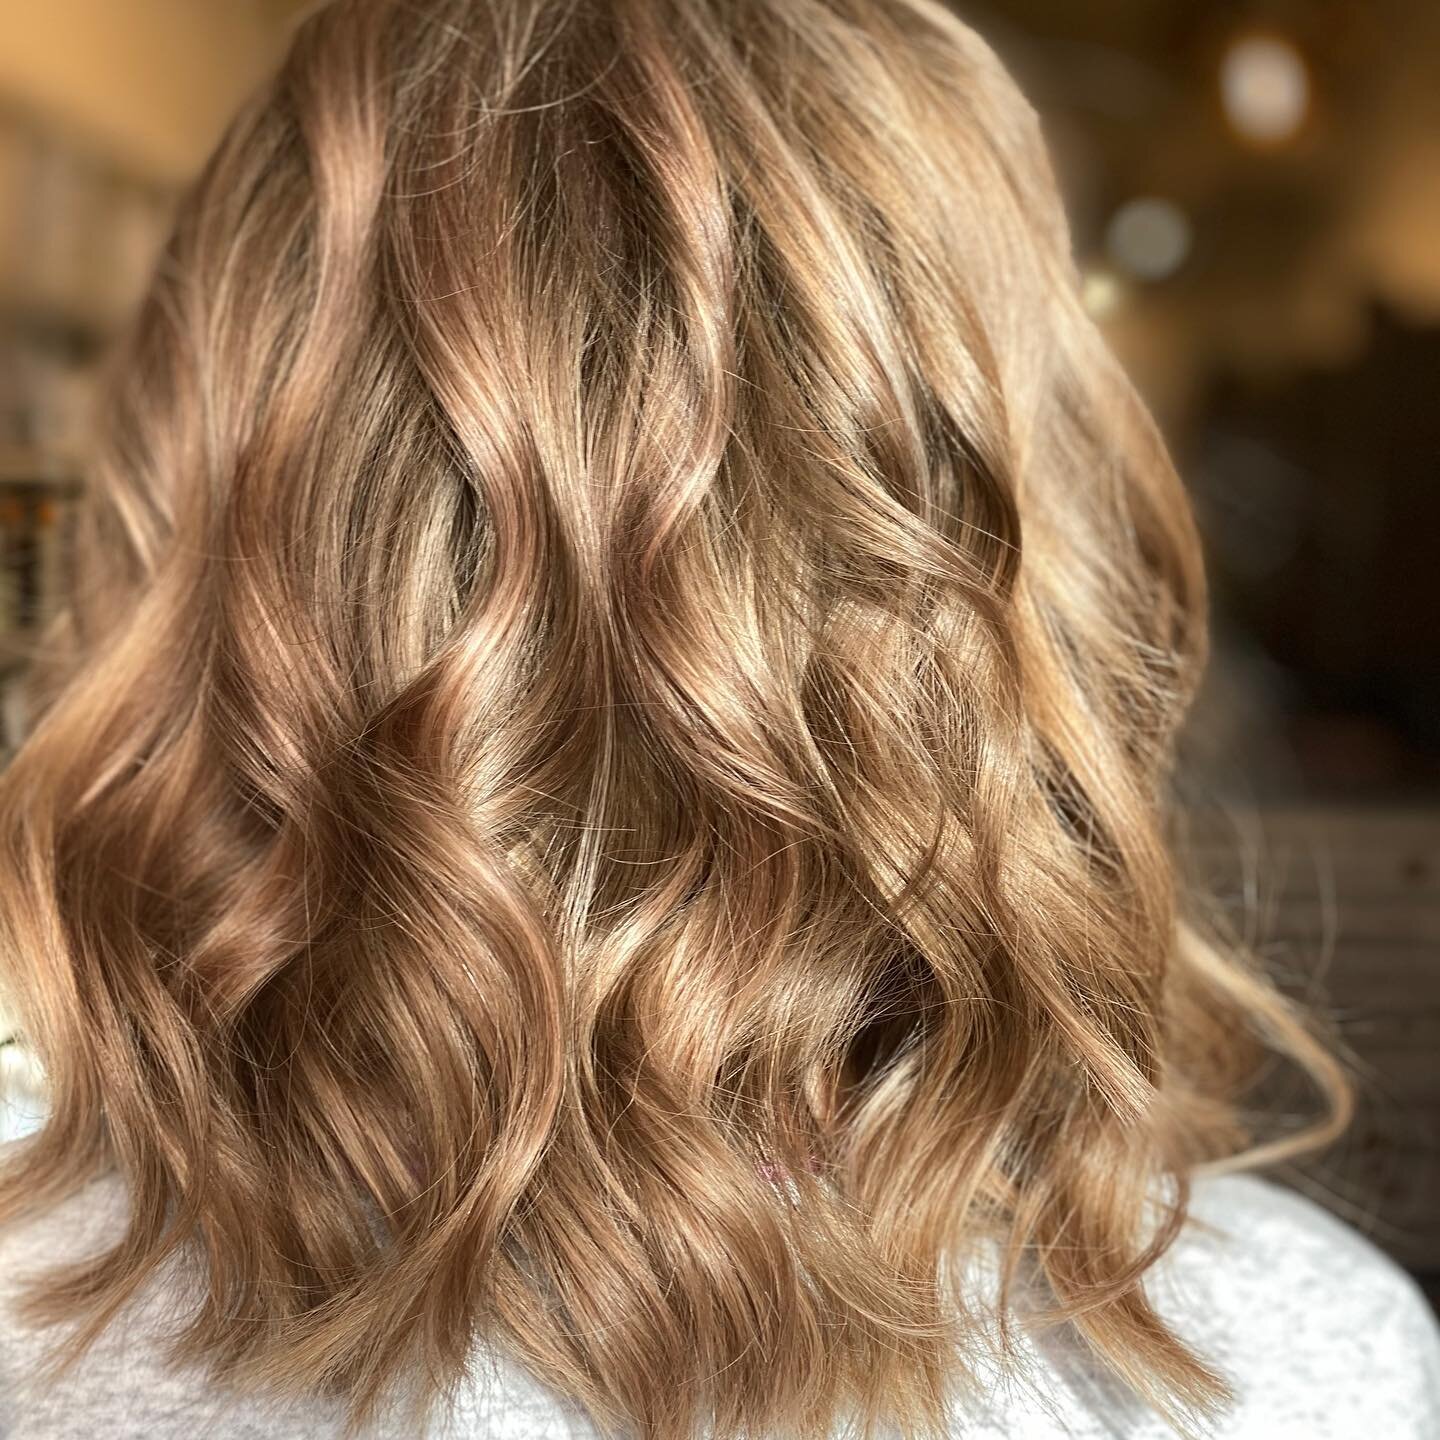 Natural Sunkissed highlights for the win!